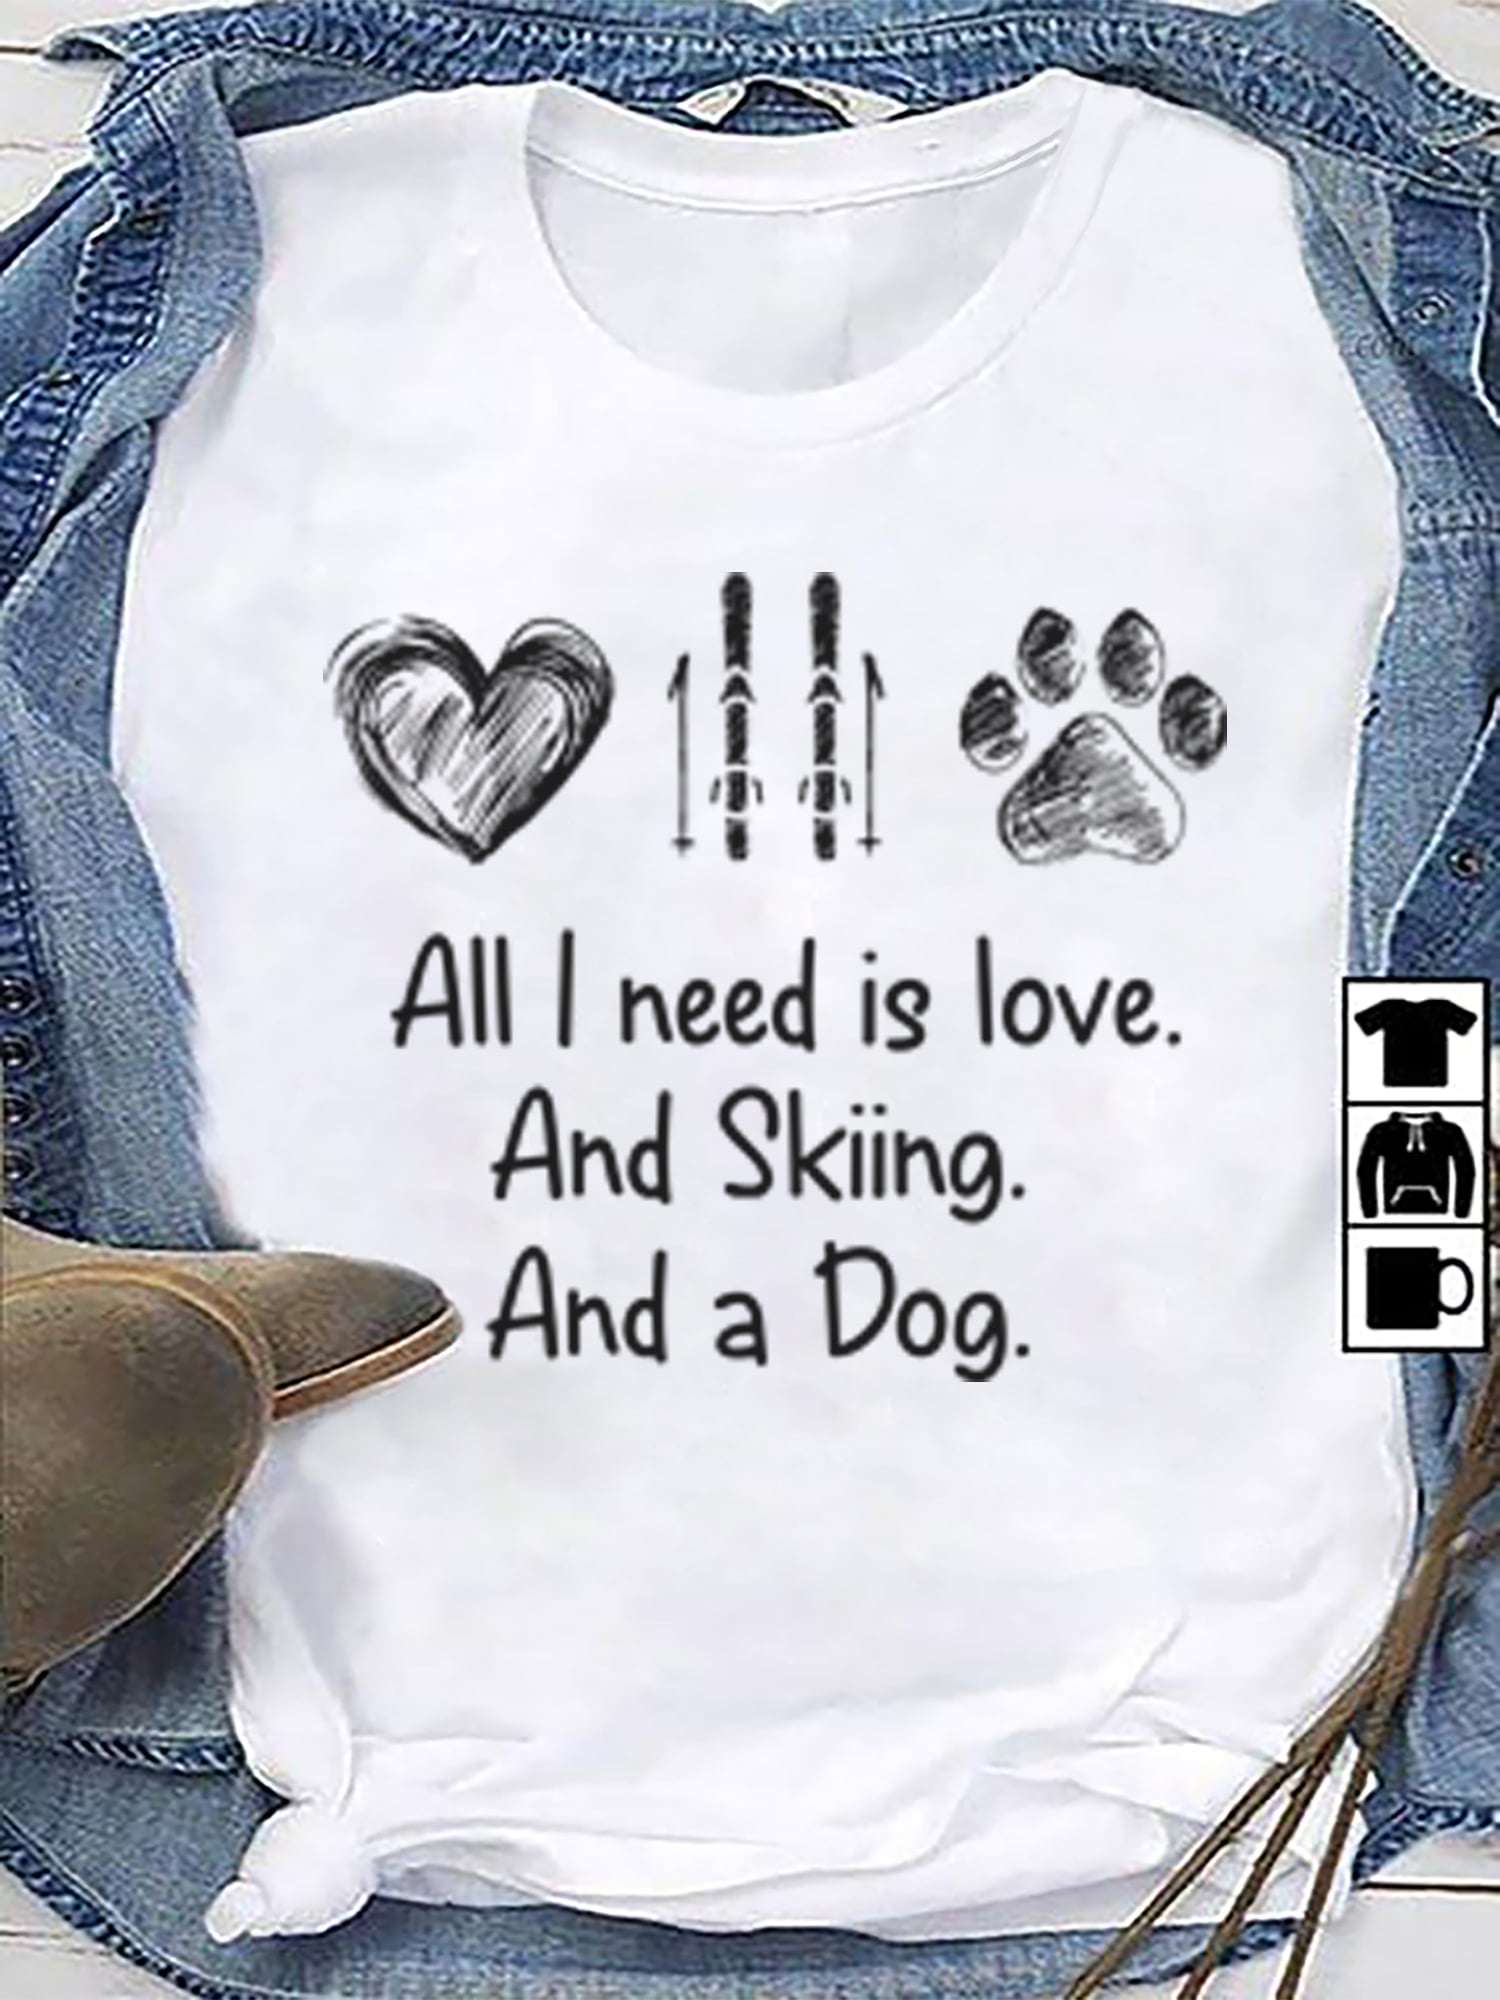 All I need is love and skiing and a dog - Dog and skiing, love to go skiing